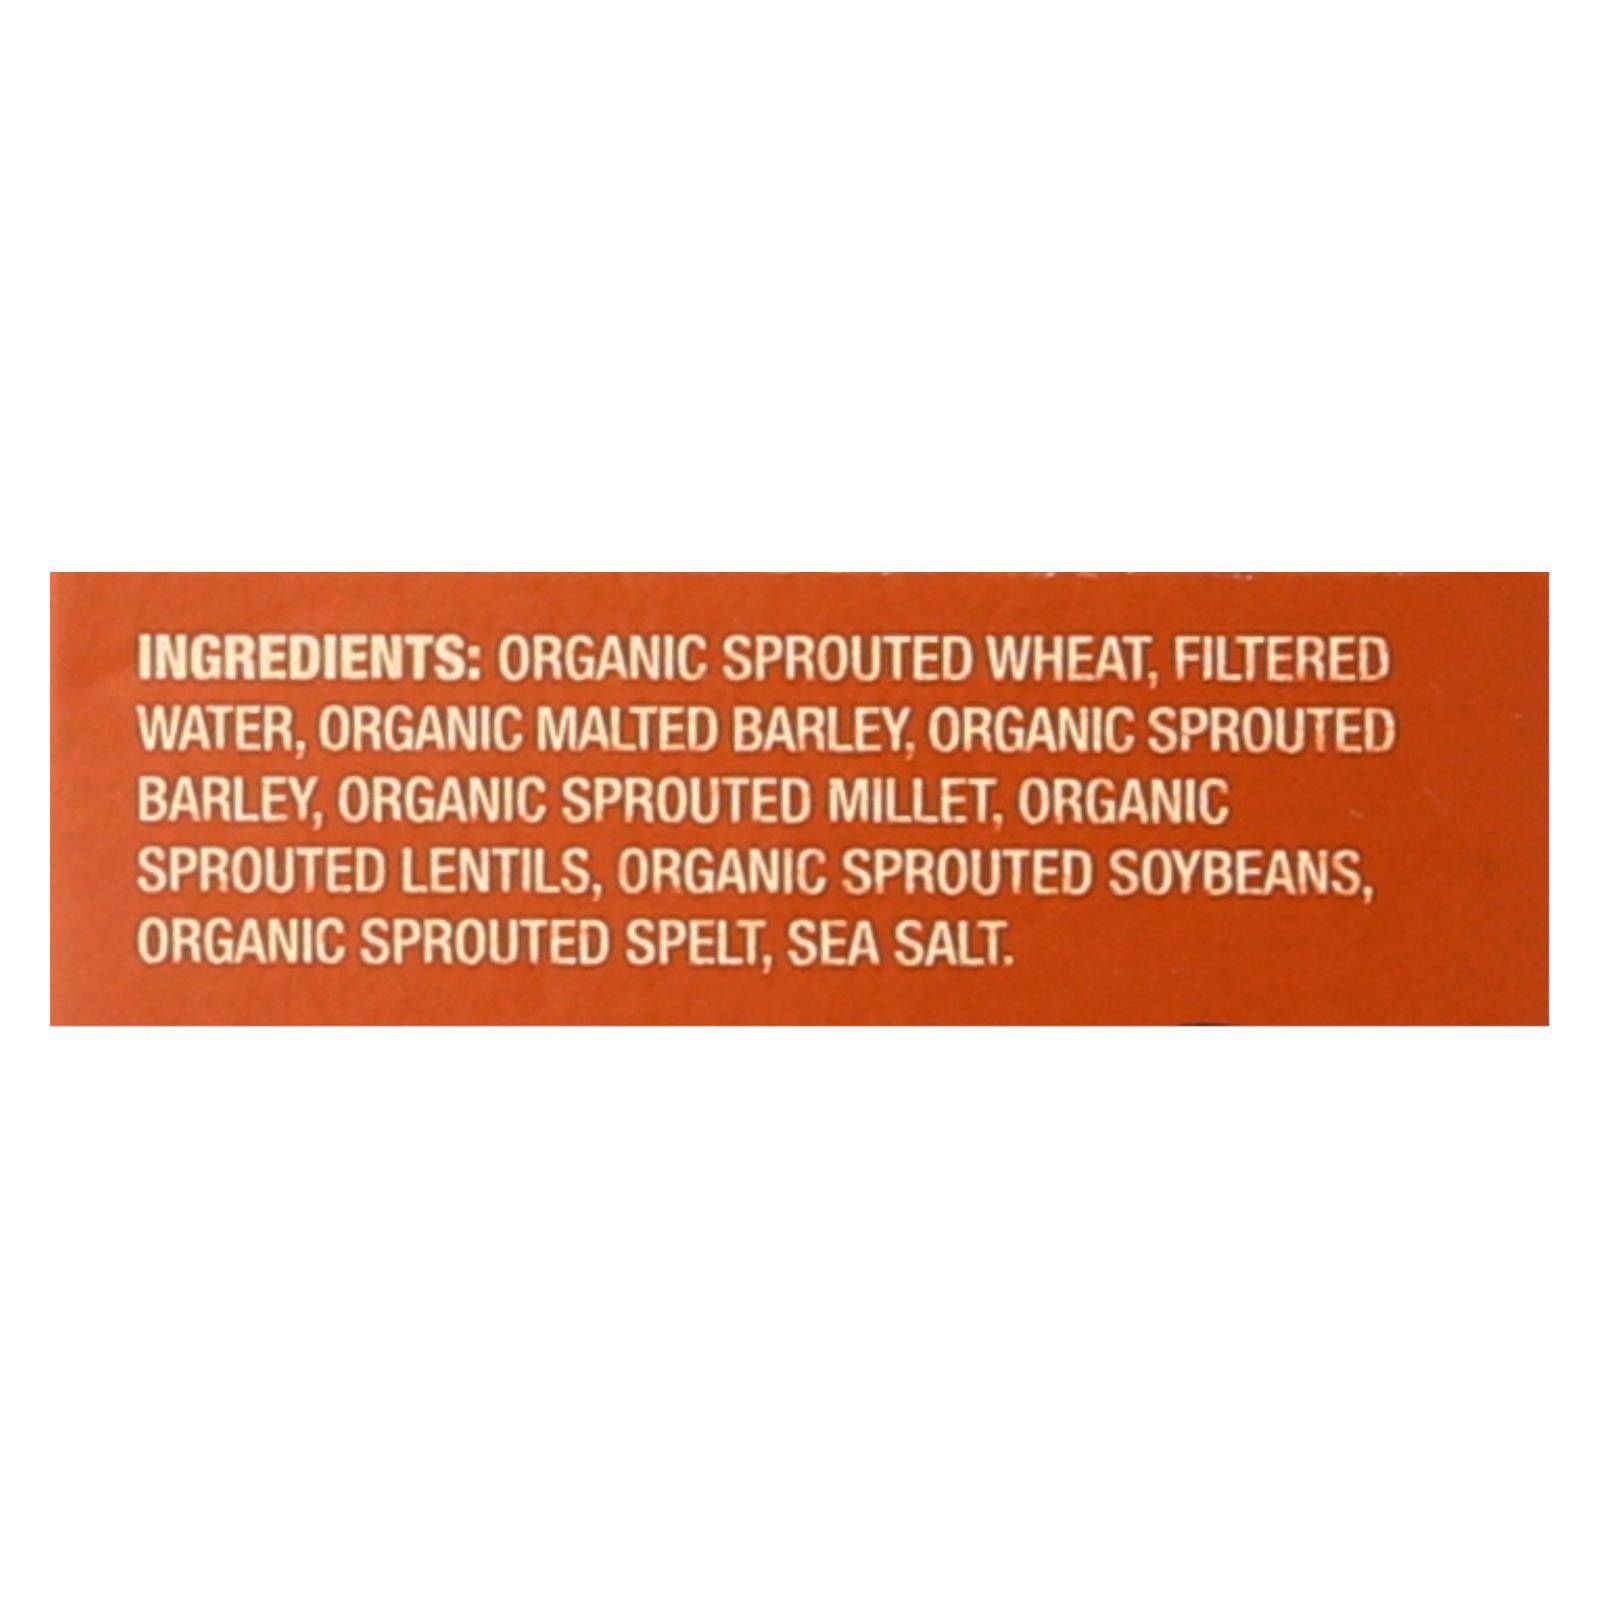 Food For Life Baking Co. Cereal - Organic - Ezekiel 4-9 - Sprouted Whole Grain - Original - 16 Oz - Case Of 6 | OnlyNaturals.us